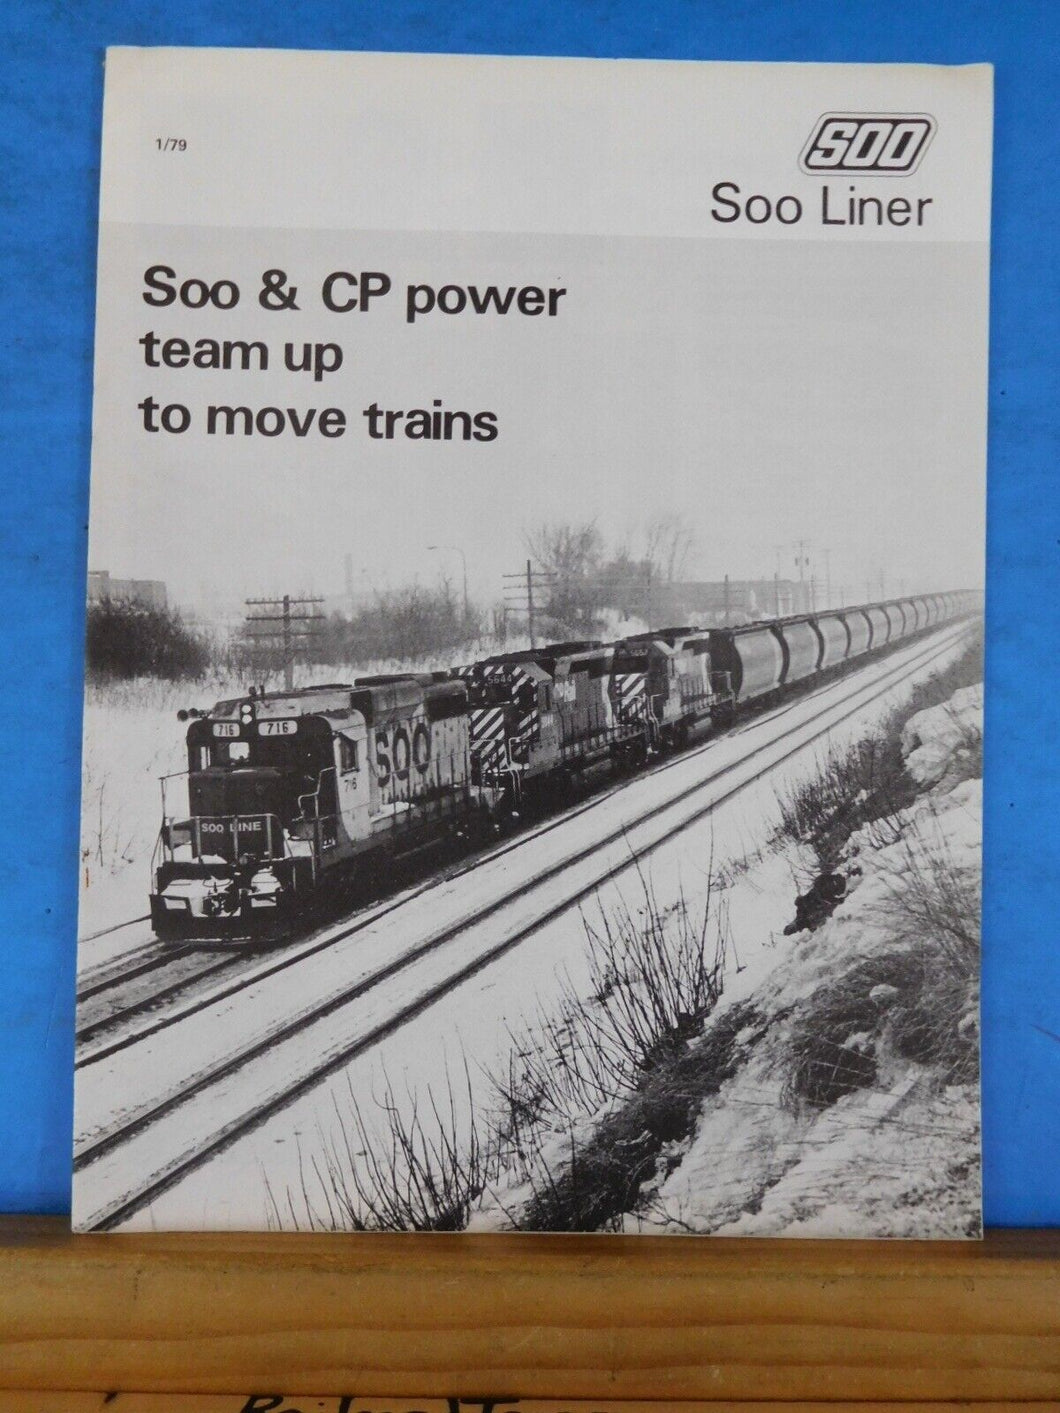 SOO Liner 1979 1/79 Employee magazine Soo & CP power team up to move trains